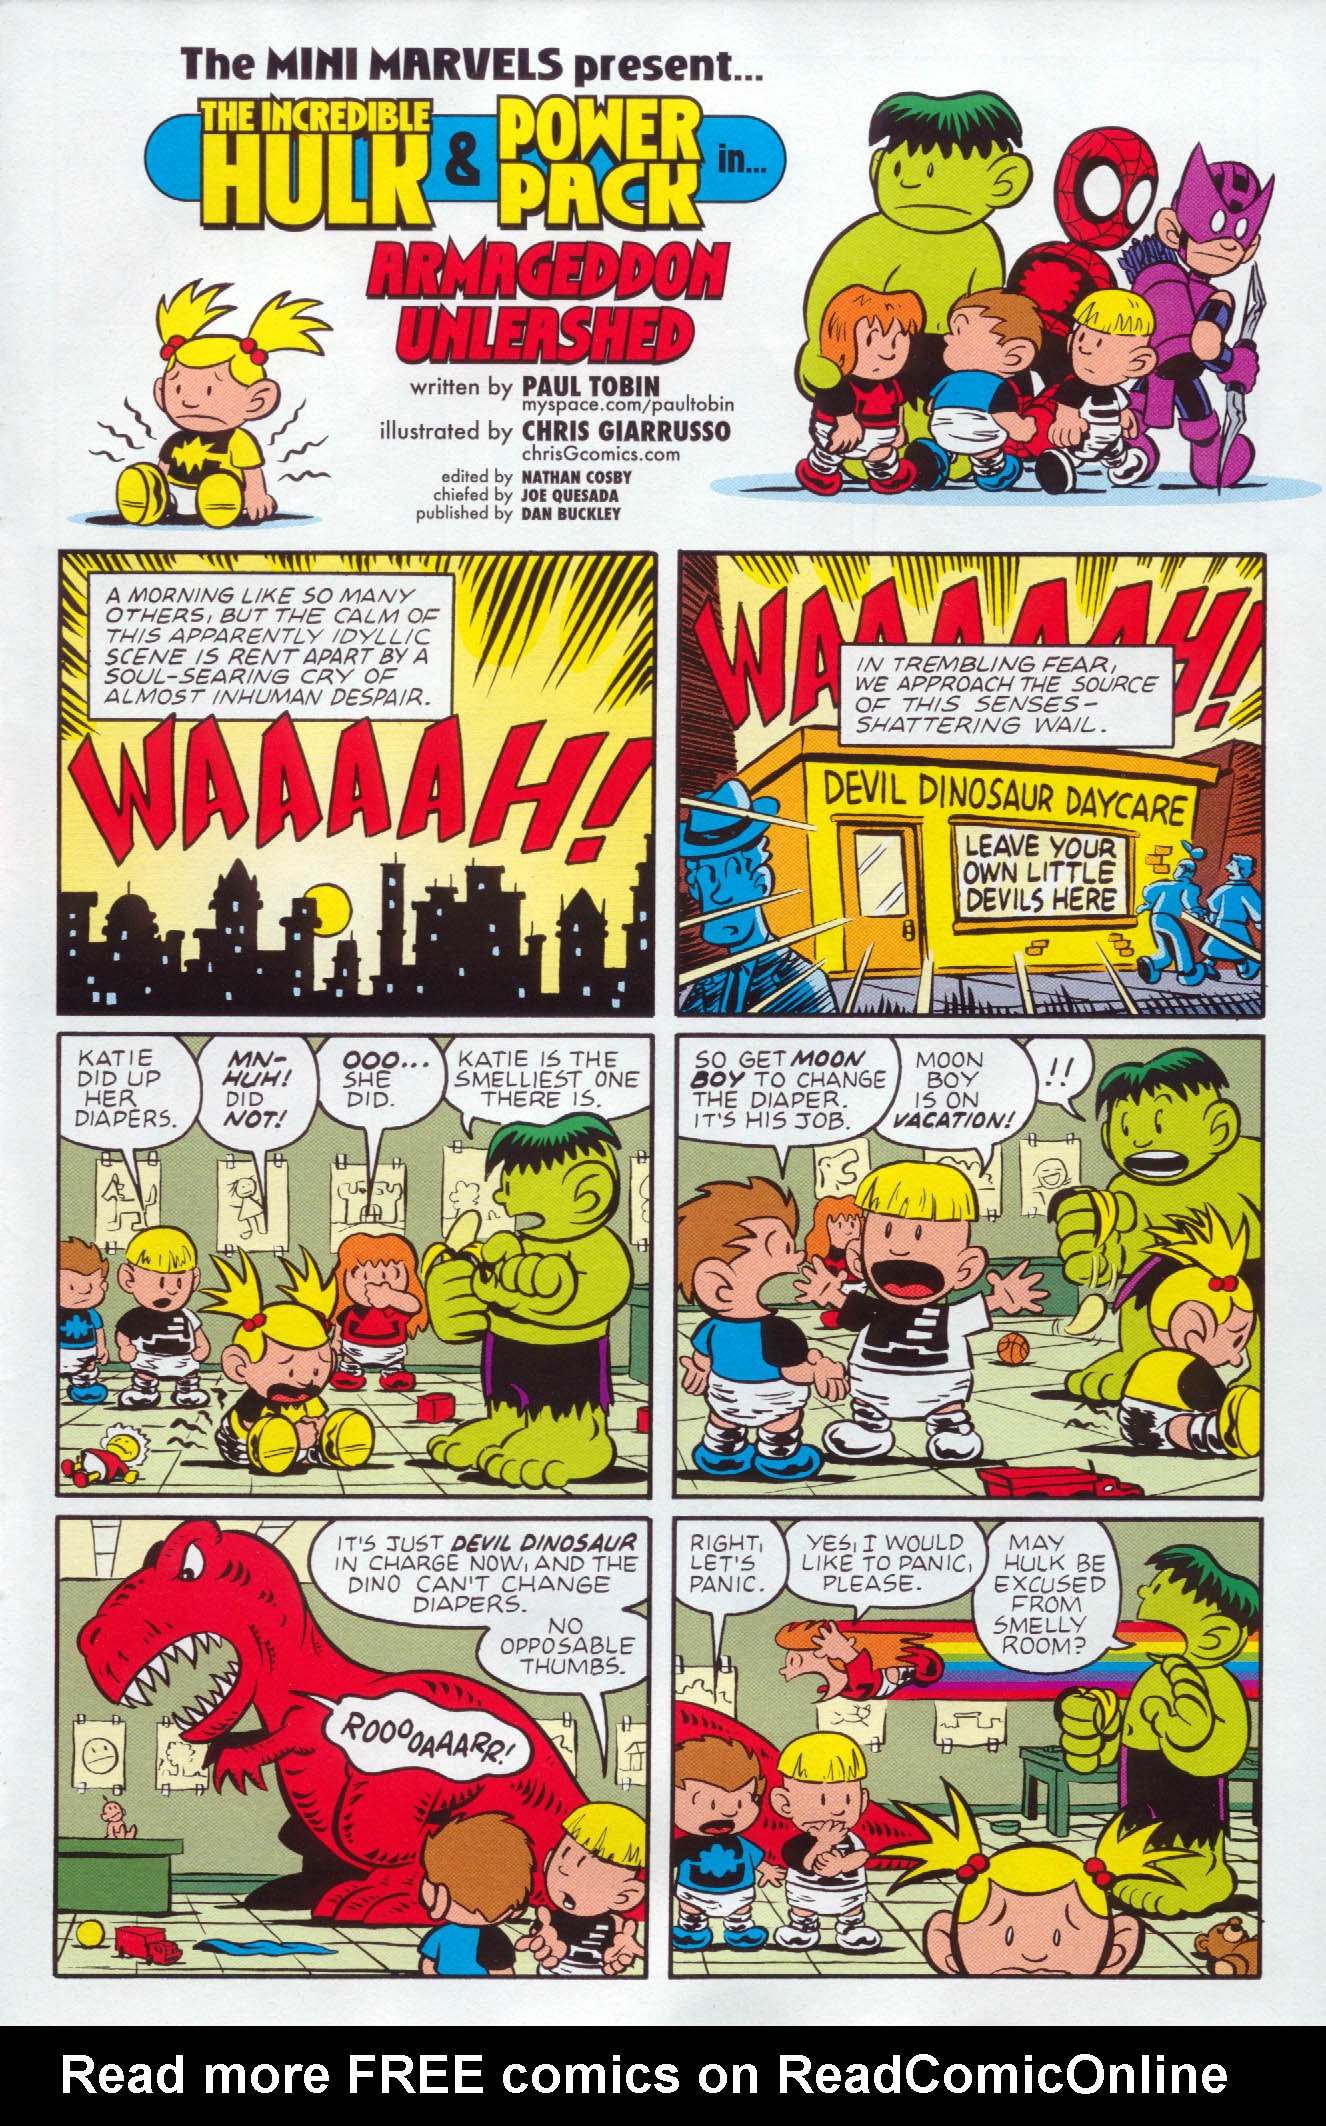 Read online Hulk and Power Pack comic -  Issue #2 - 23